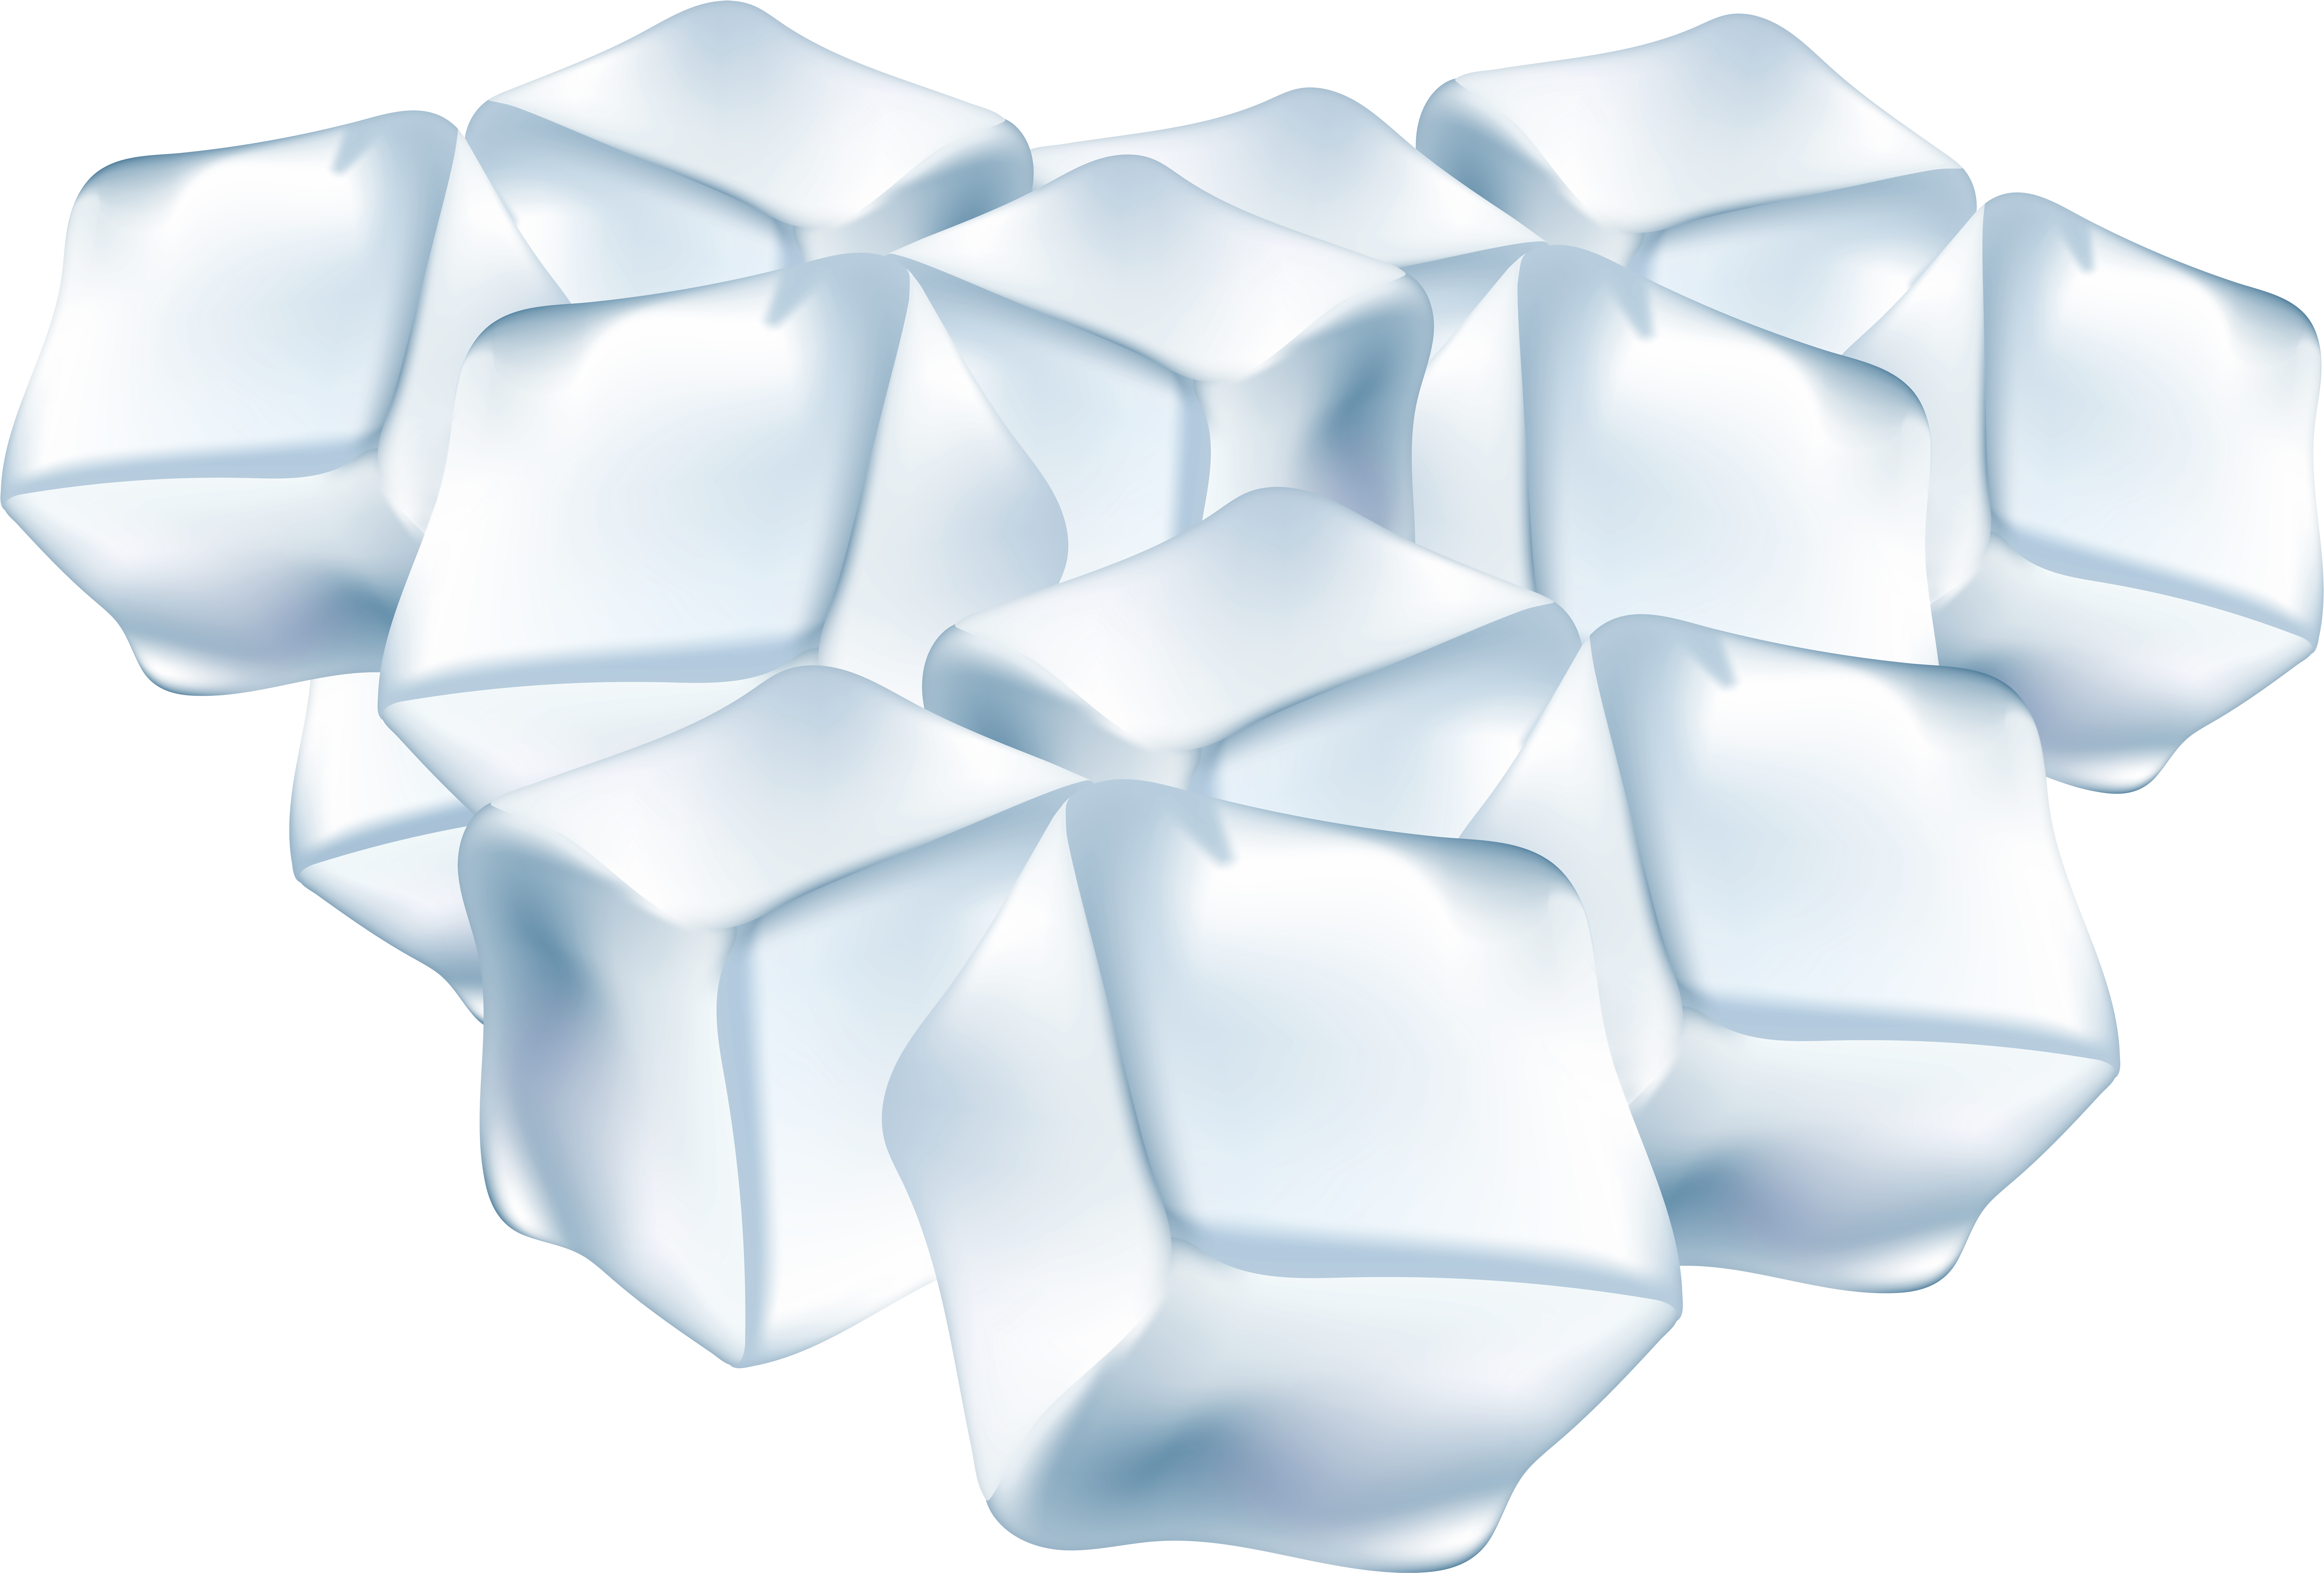 Clusterof Ice Cubes Graphic PNG